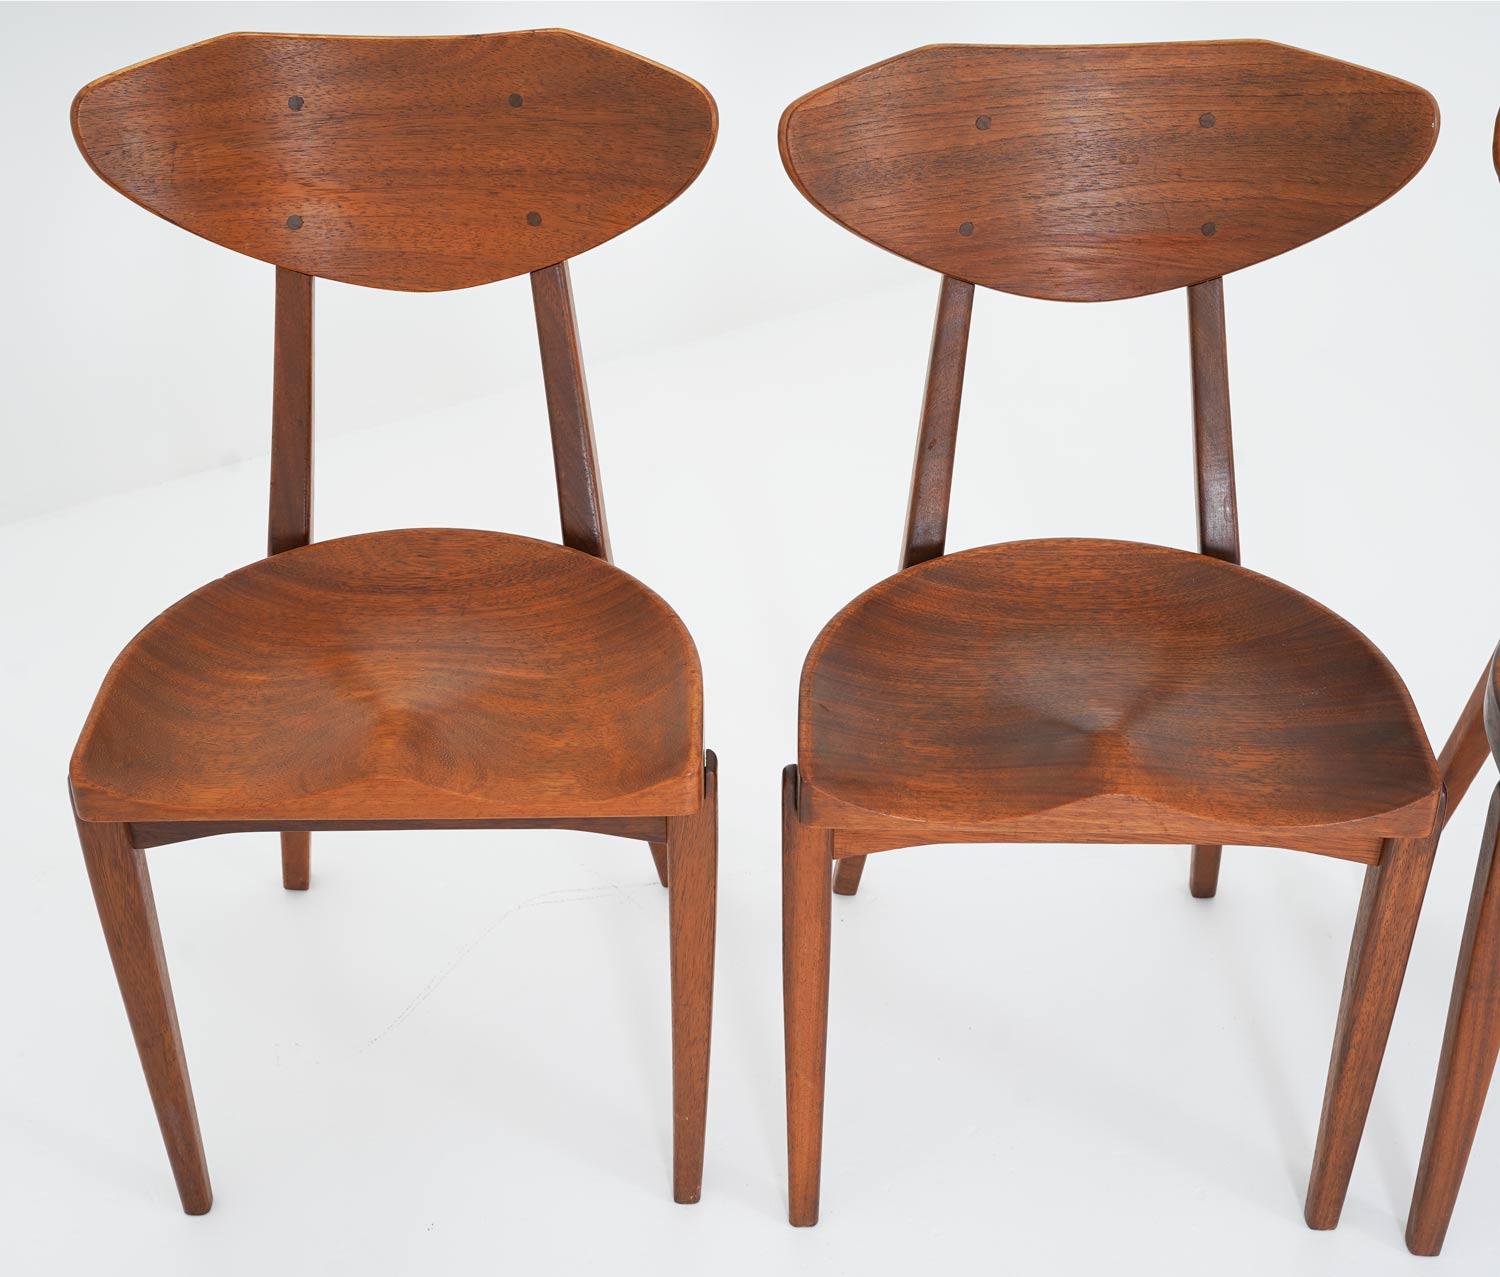 Set of 6 dining chairs by Richard Jensen and Kjaerulff Rasmussen, Denmark.
These chairs are made of solid teak. The design is inspired by traditional milk stools, with the beautifully carved seats. The chairs offer a practical handle on the